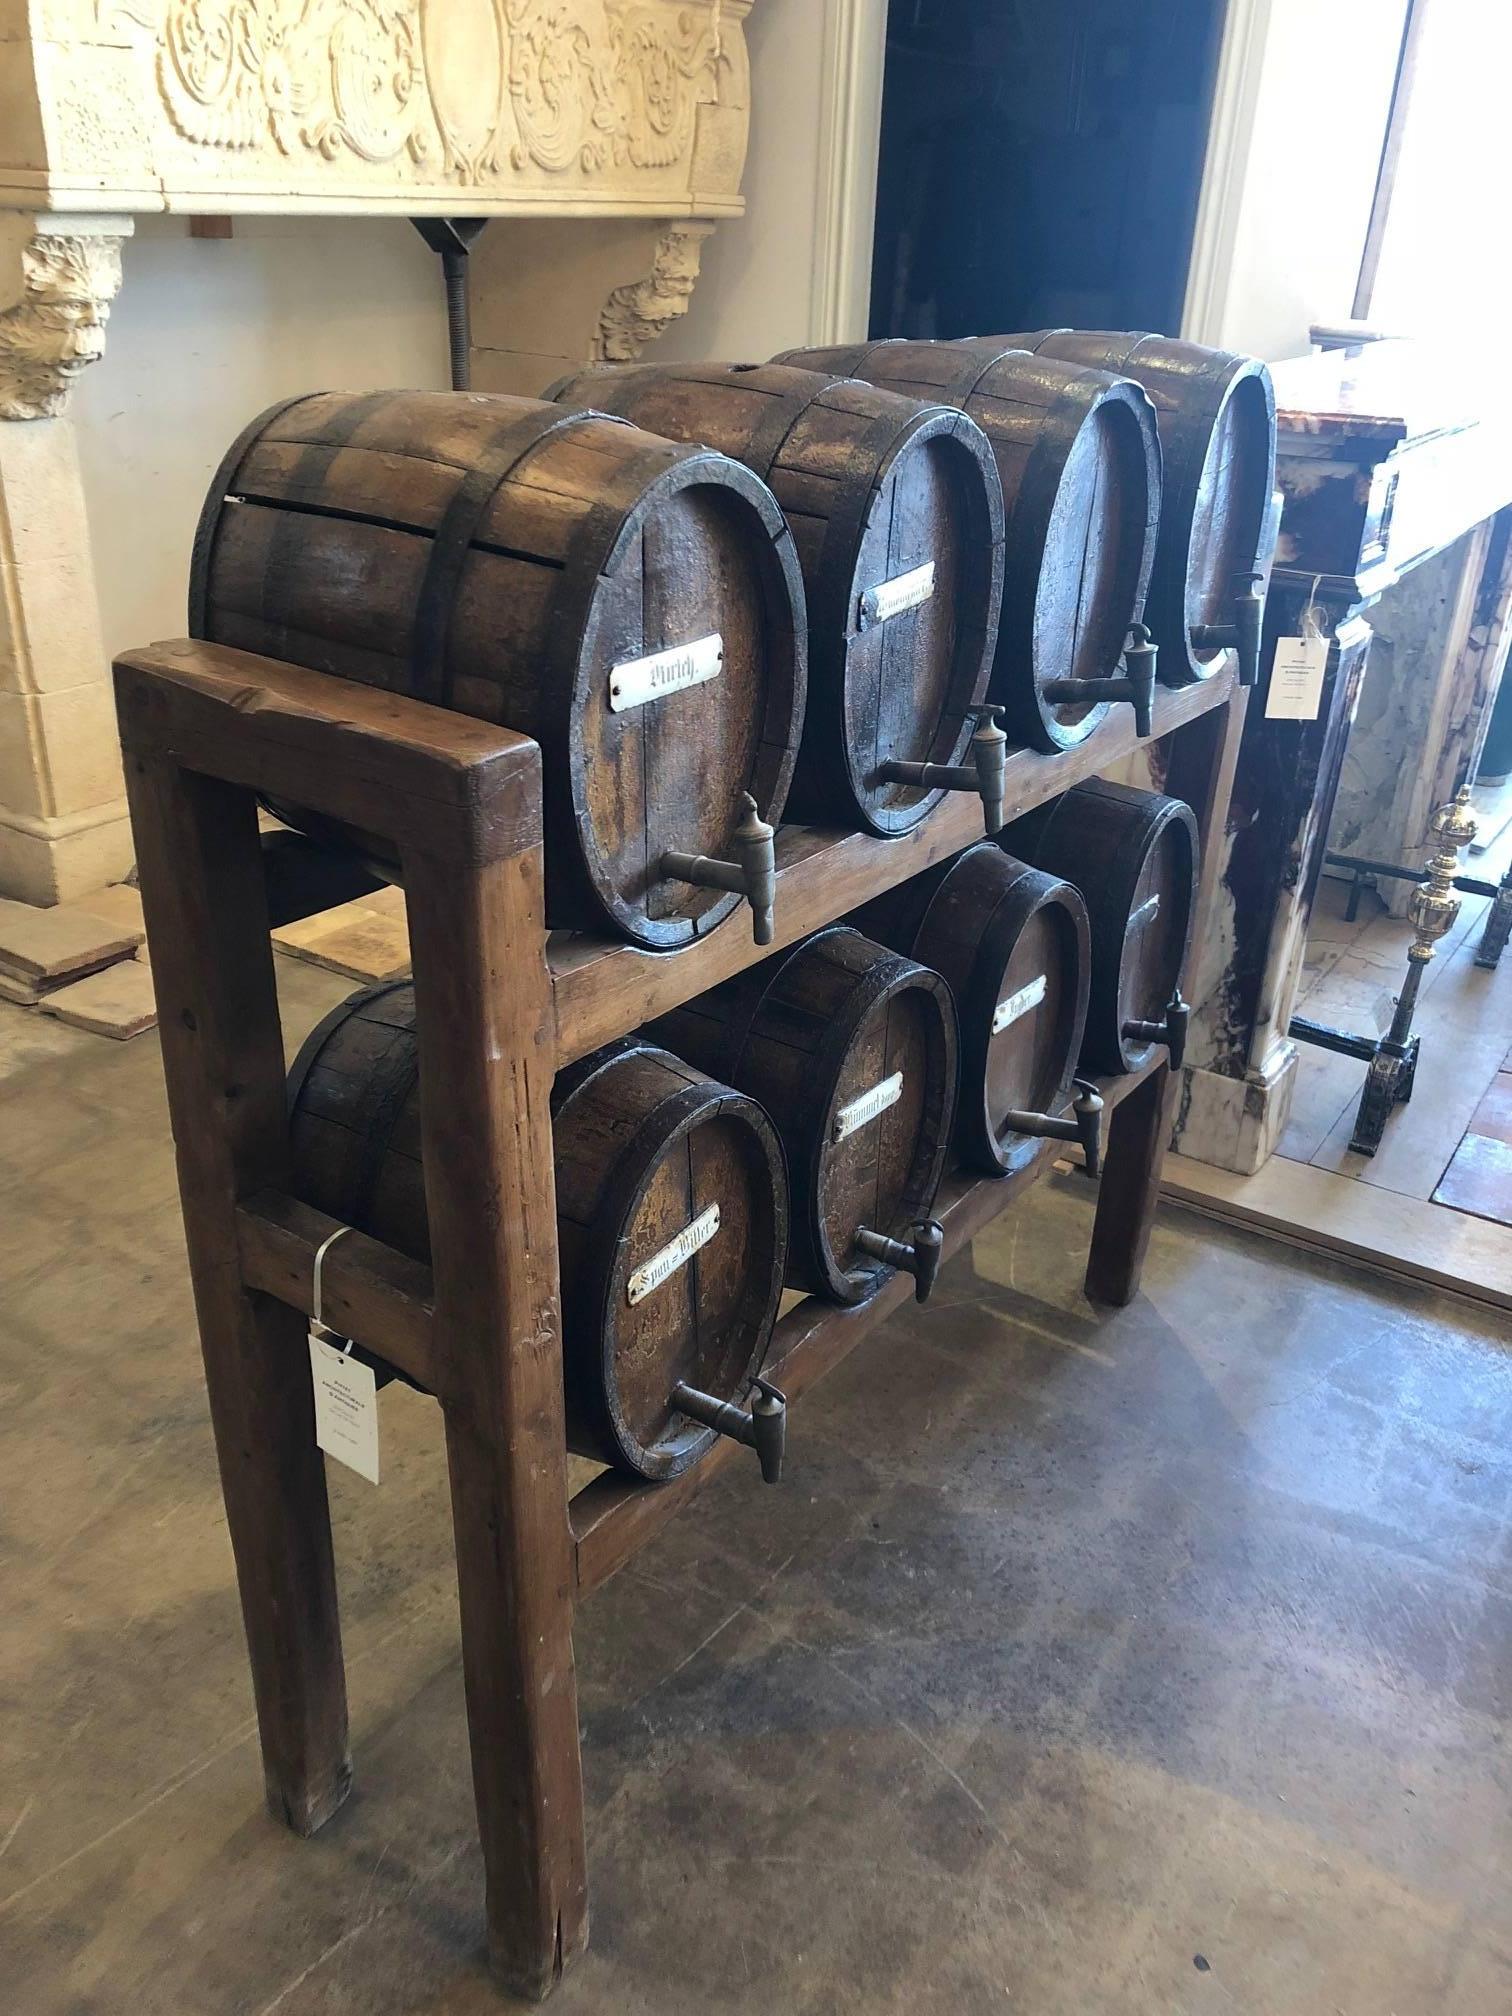 This is a rare set of old oak bourbon whiskey casks. Eight antique, metal banded, whiskey barrels displayed on a custom wooden rack, the barrels are a bit warped and they have a few chips off the top which really highlights the age and character of